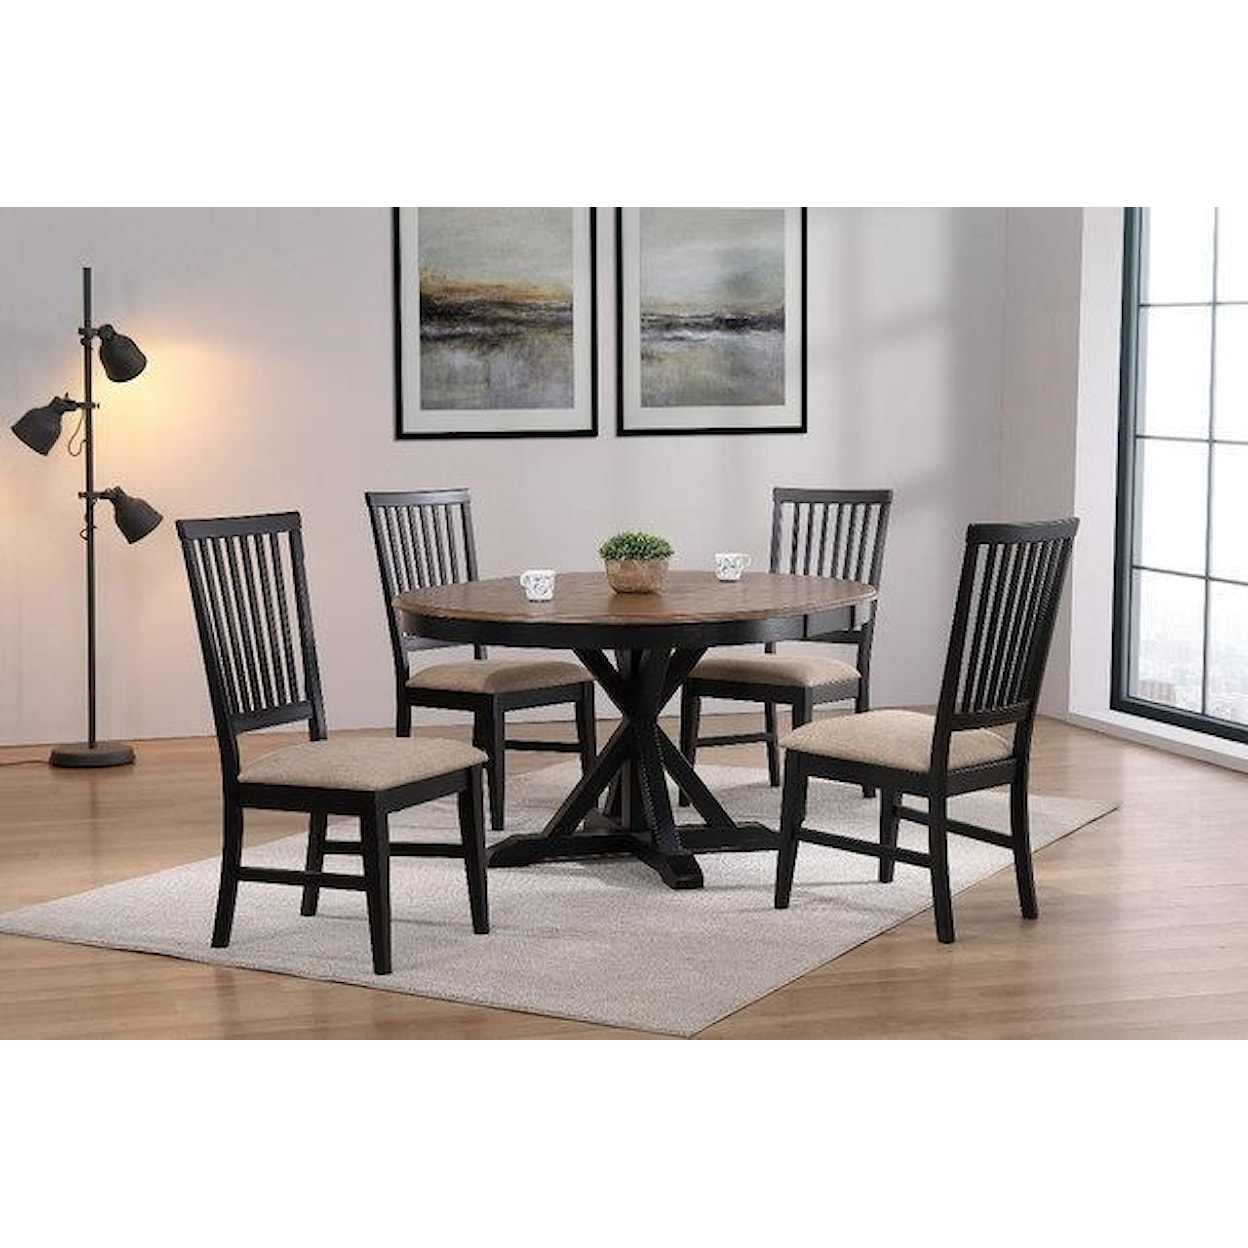 Donald Choi Canada Barrie Black Finish Black Barrie Side Chair